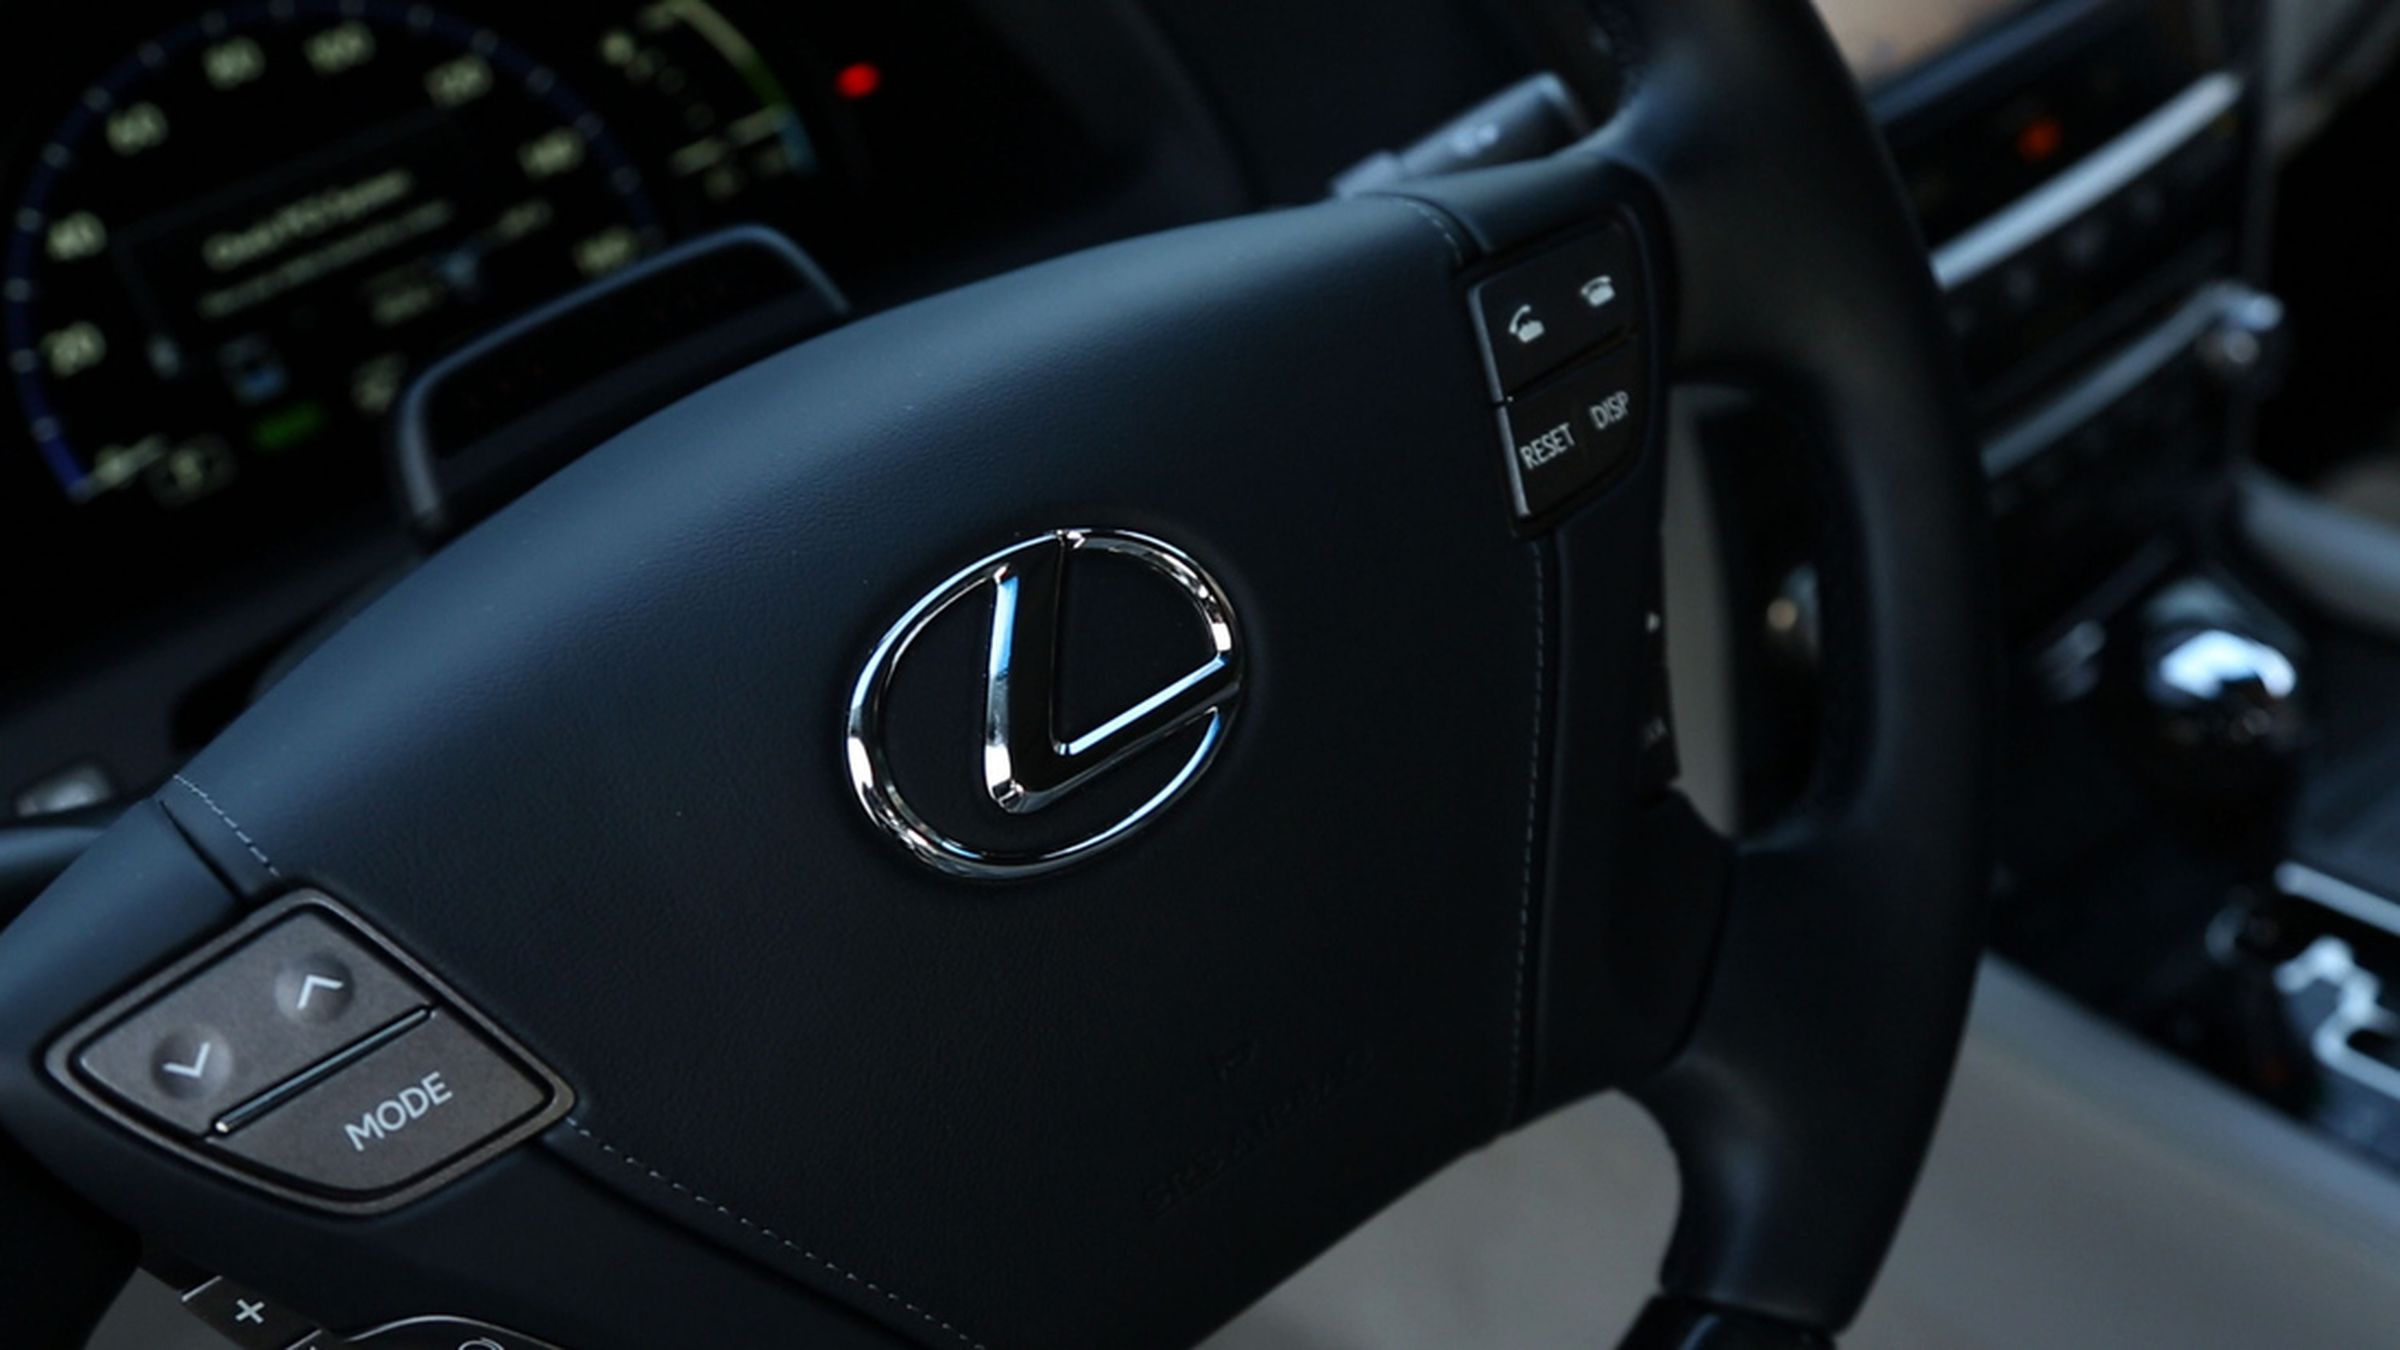 Lexus Advanced Active Safety Research Vehicle (AASRV) Pictures